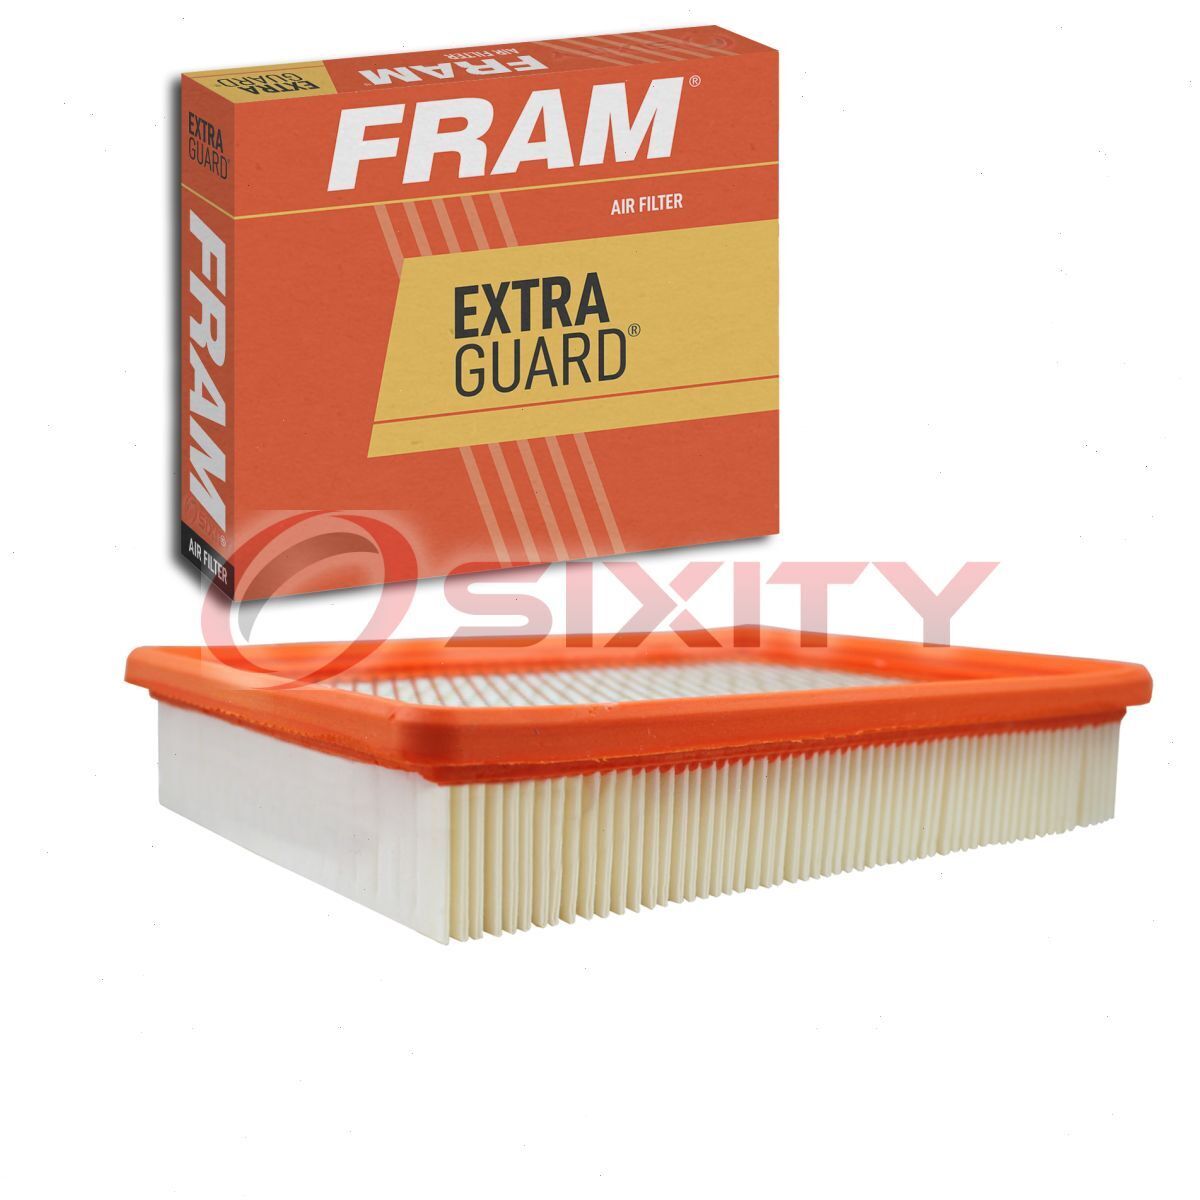 FRAM Extra Guard Air Filter for 1997-2004 Oldsmobile Silhouette Intake Inlet lk